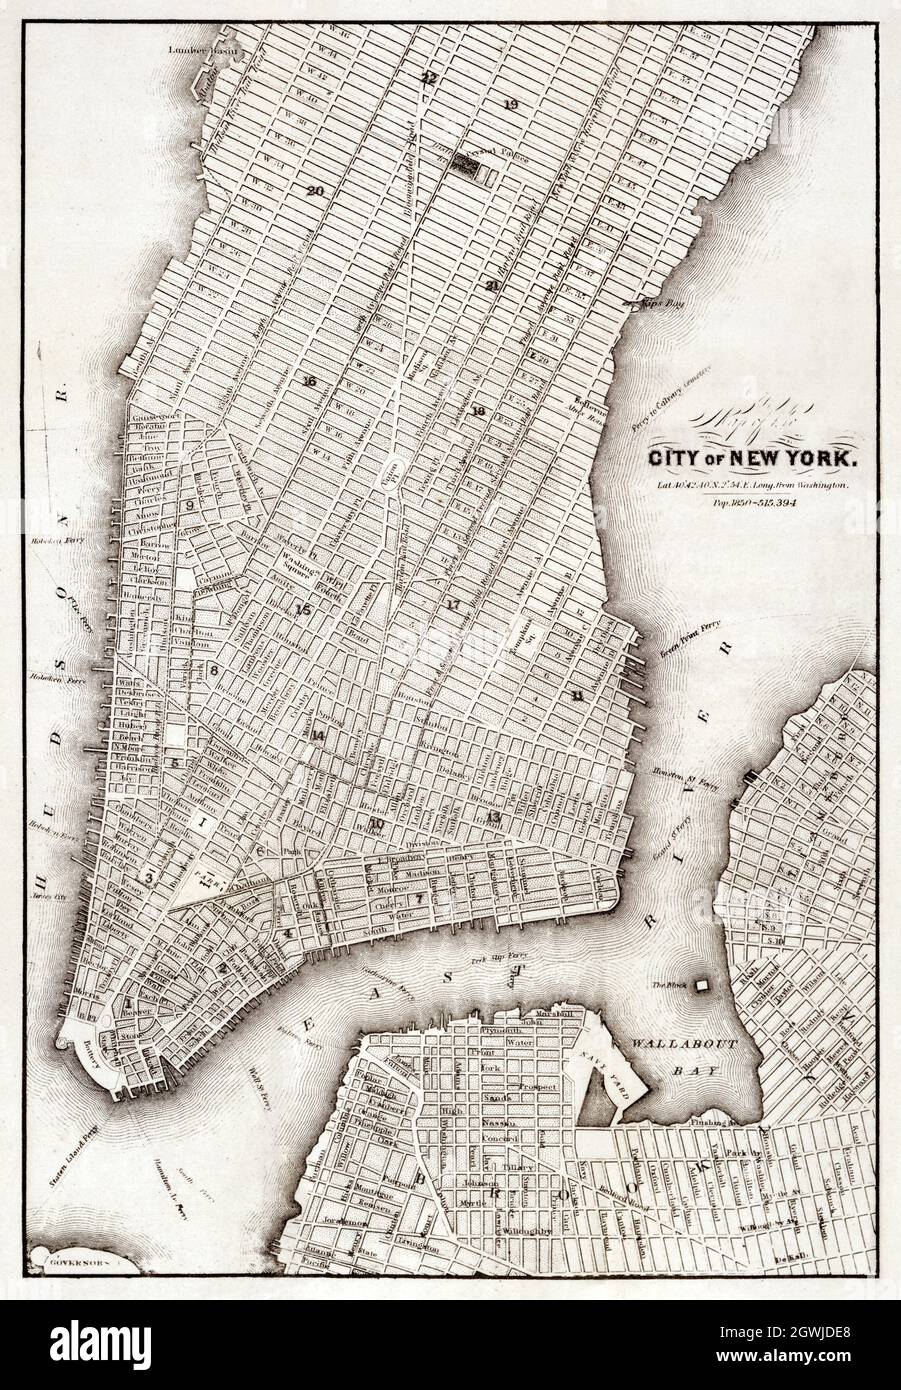 Vintage map of the city of New York (ca. 1850). Stock Photo